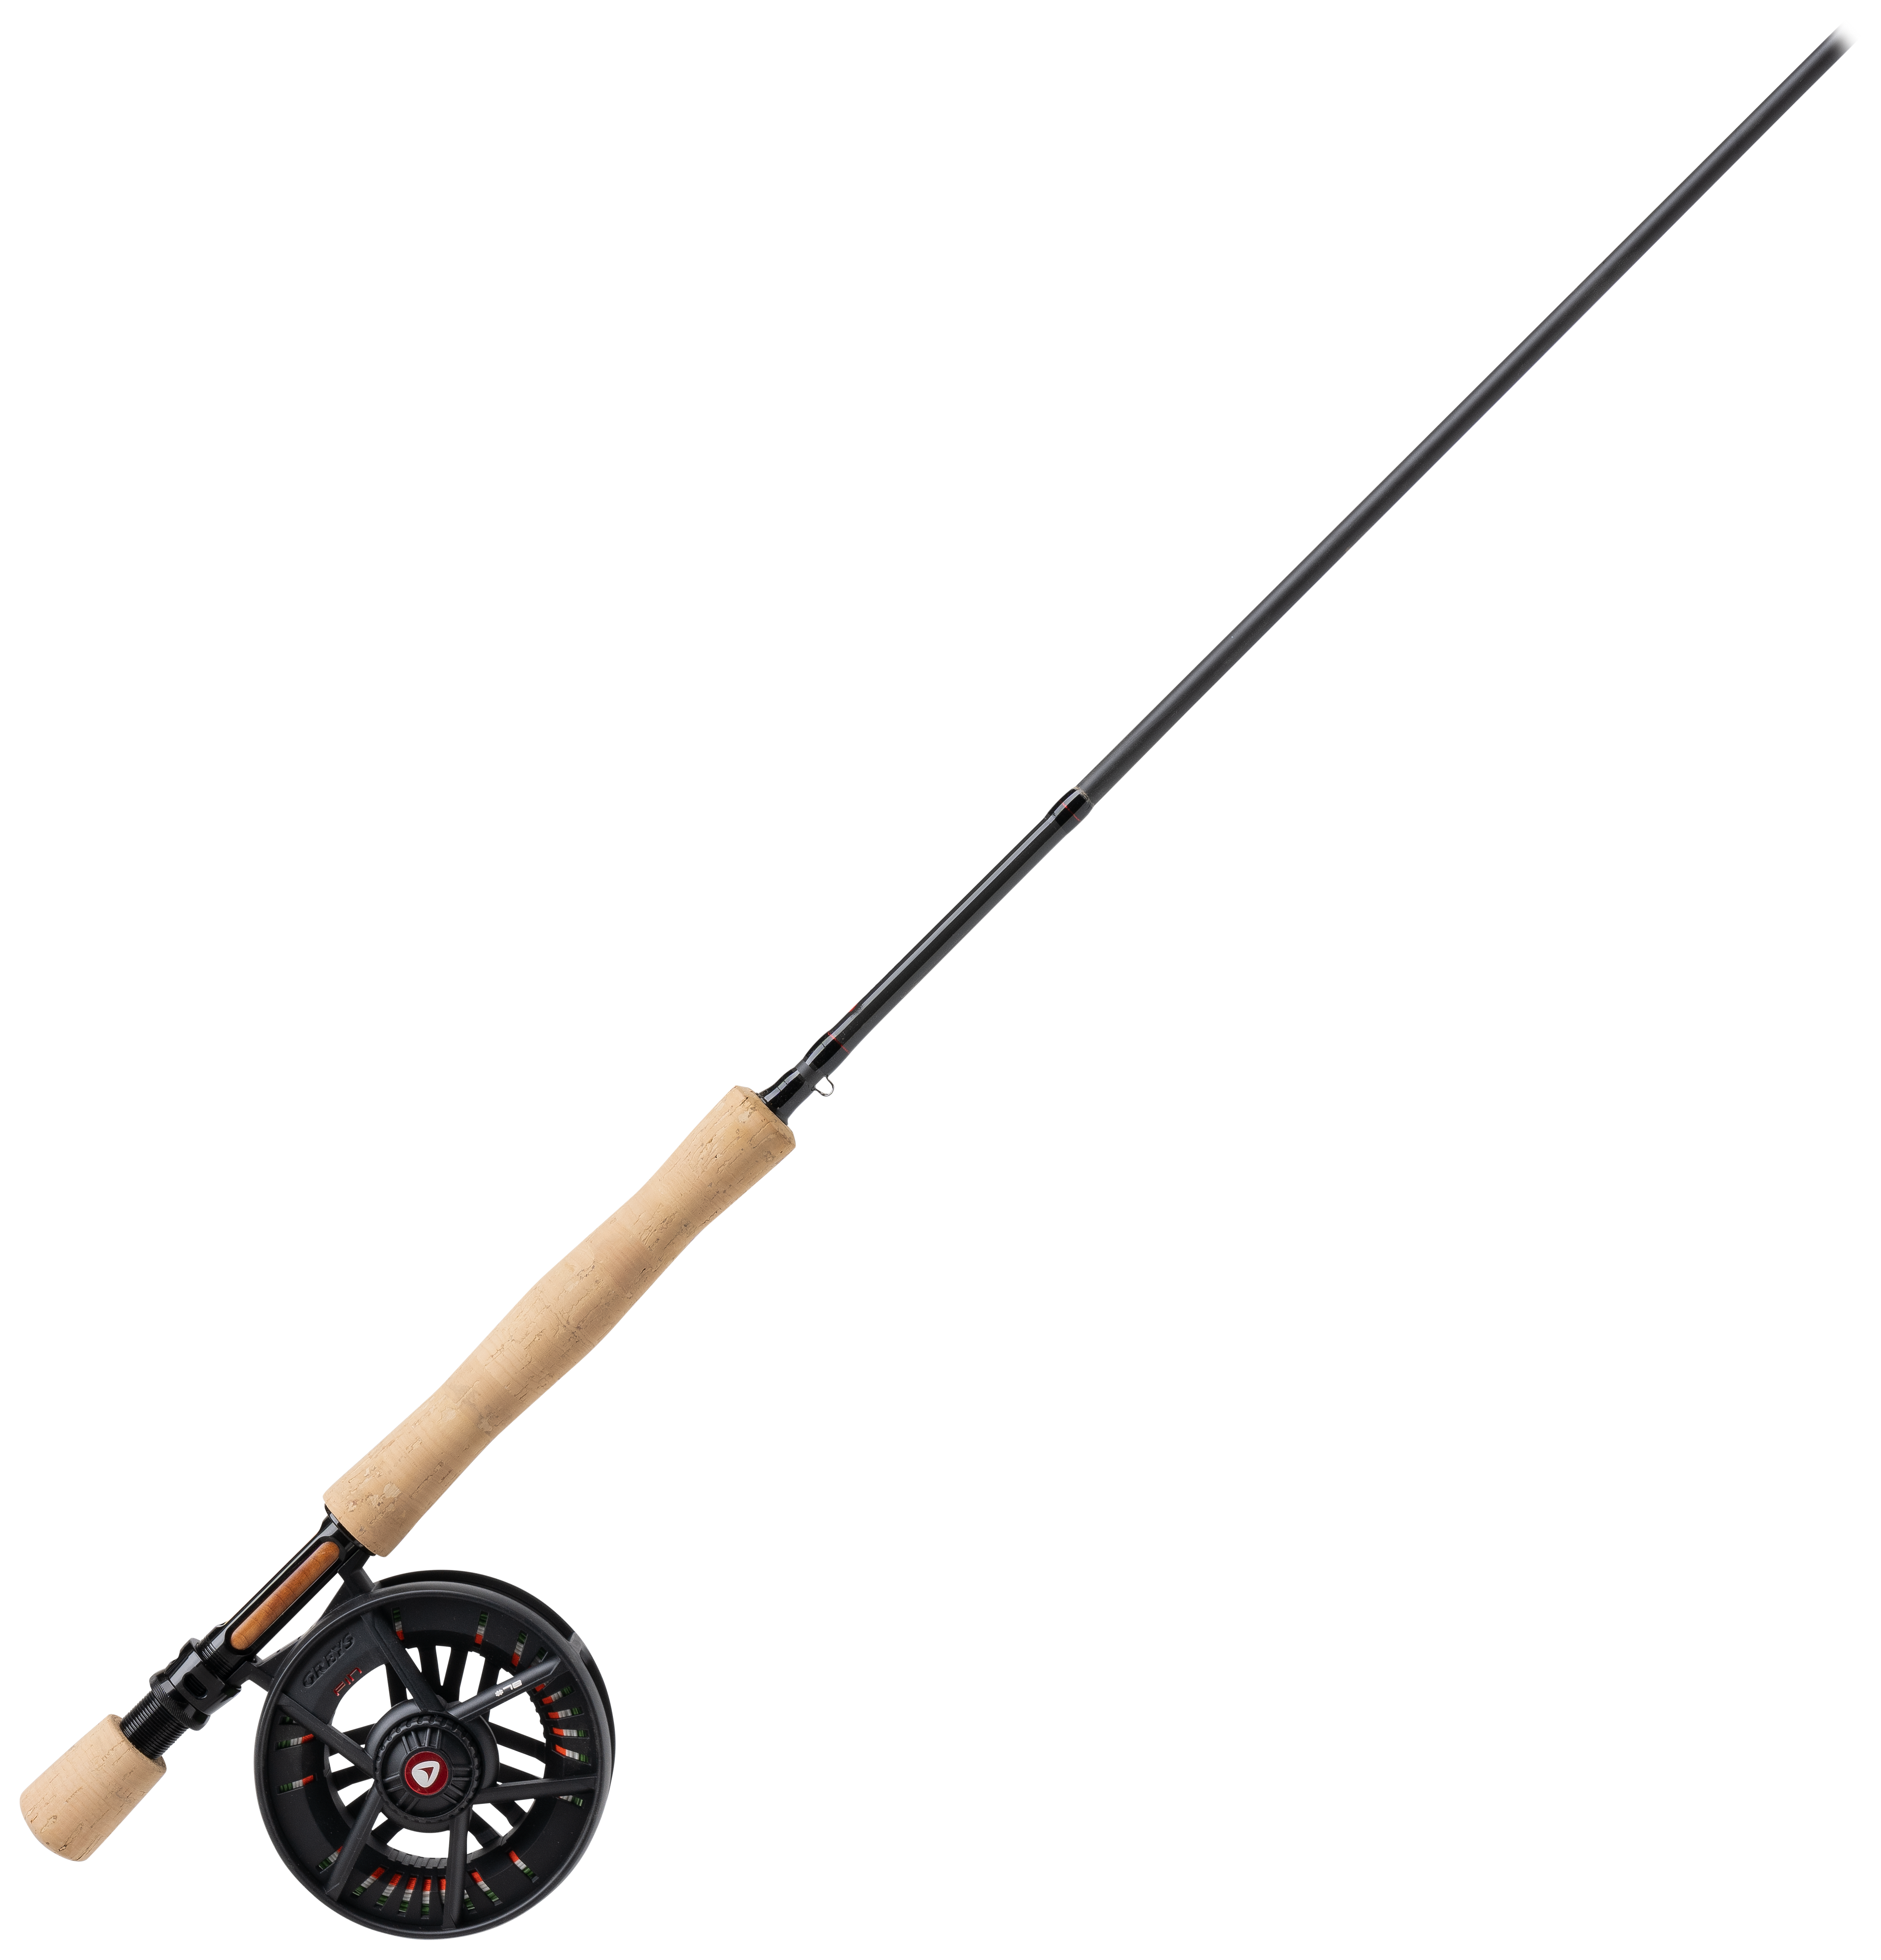 Lamson Liquid Fly Combo Outfit